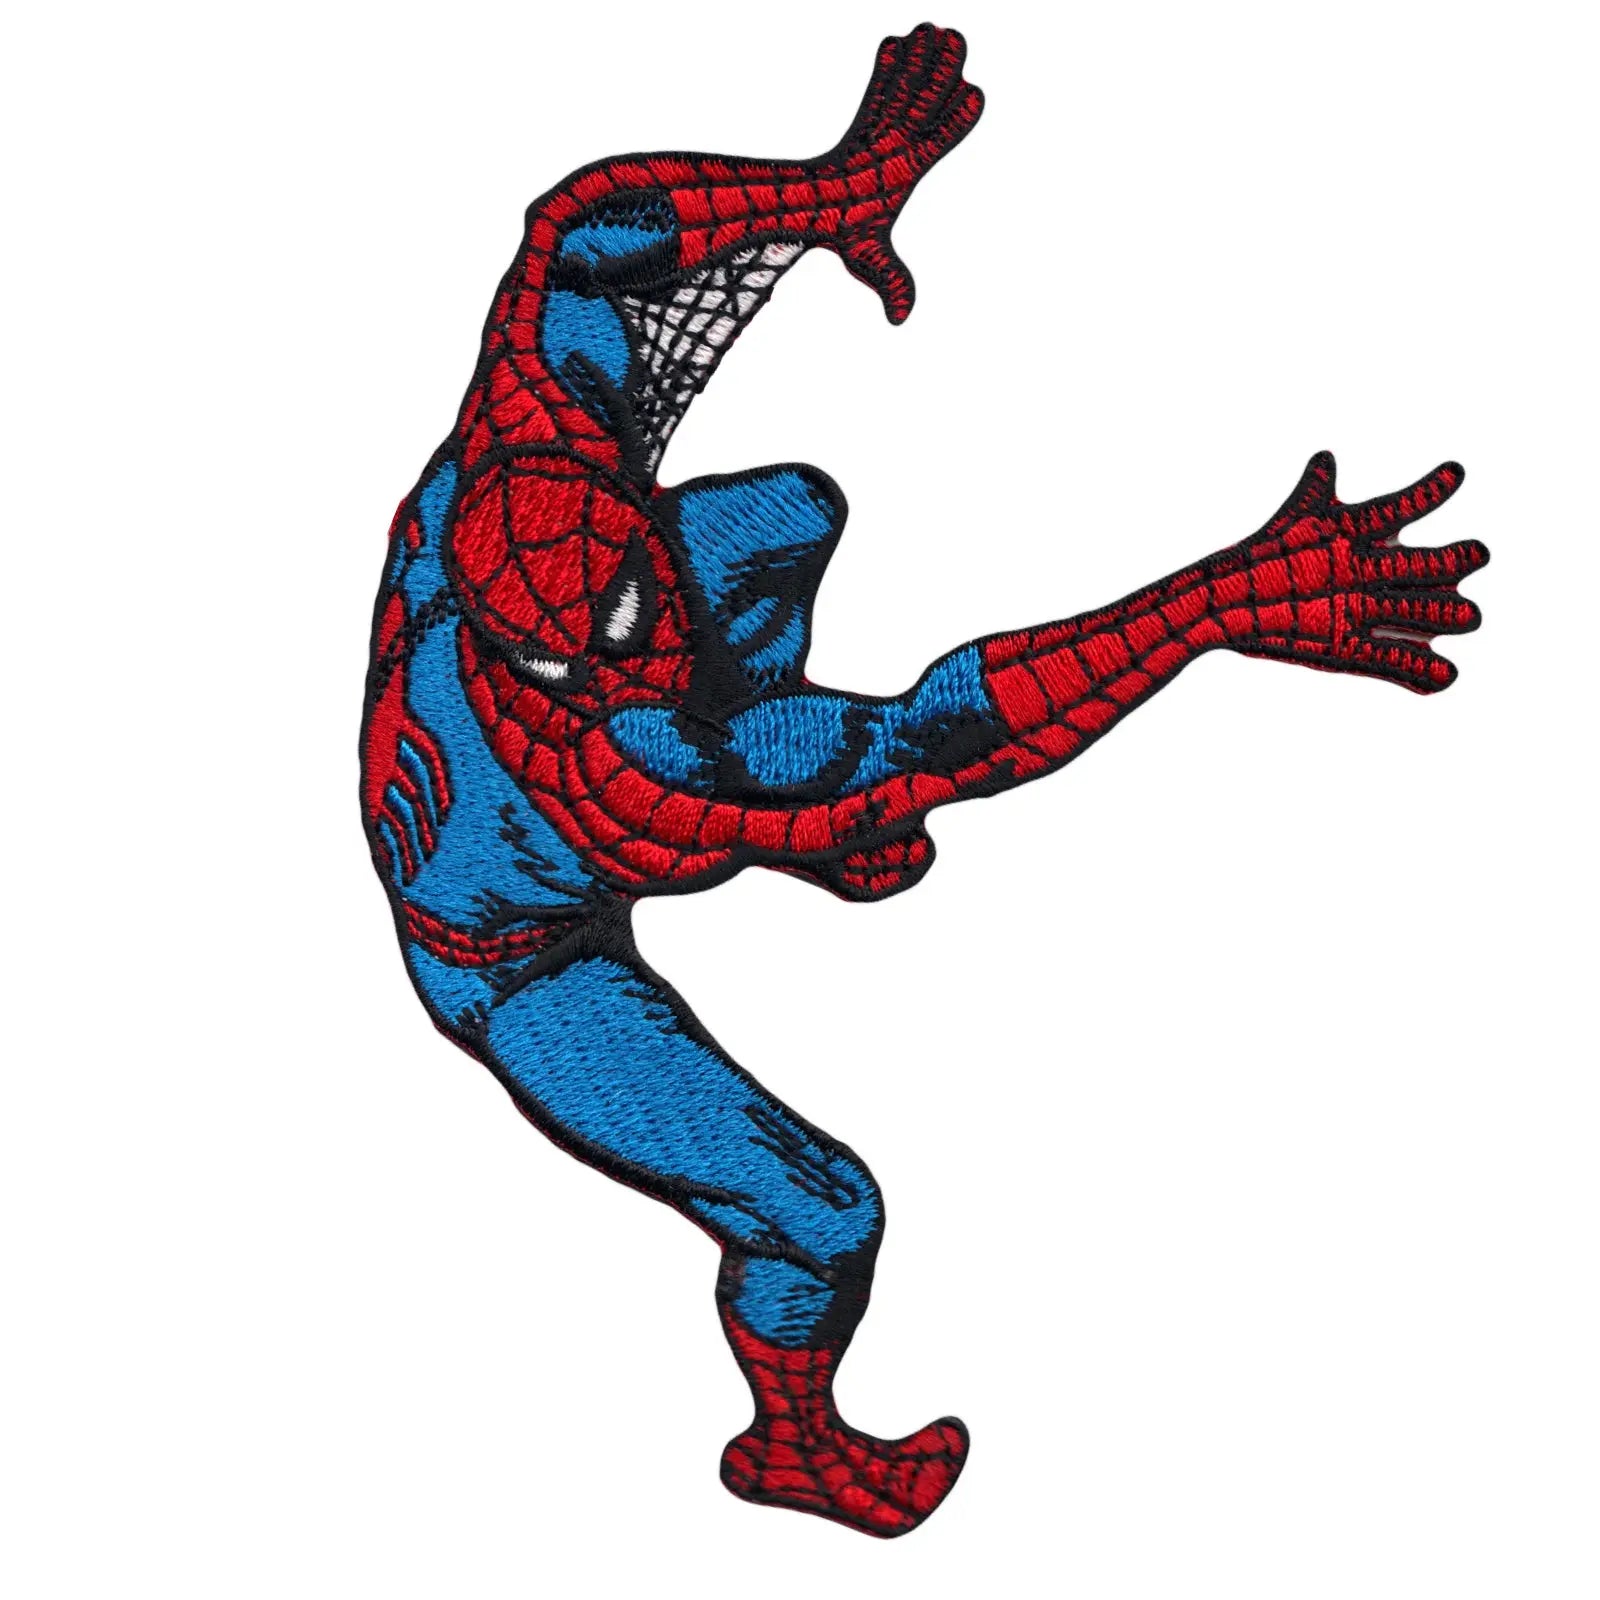 Brooklyn Cyclones on X: How do you like our Spider-Man jerseys